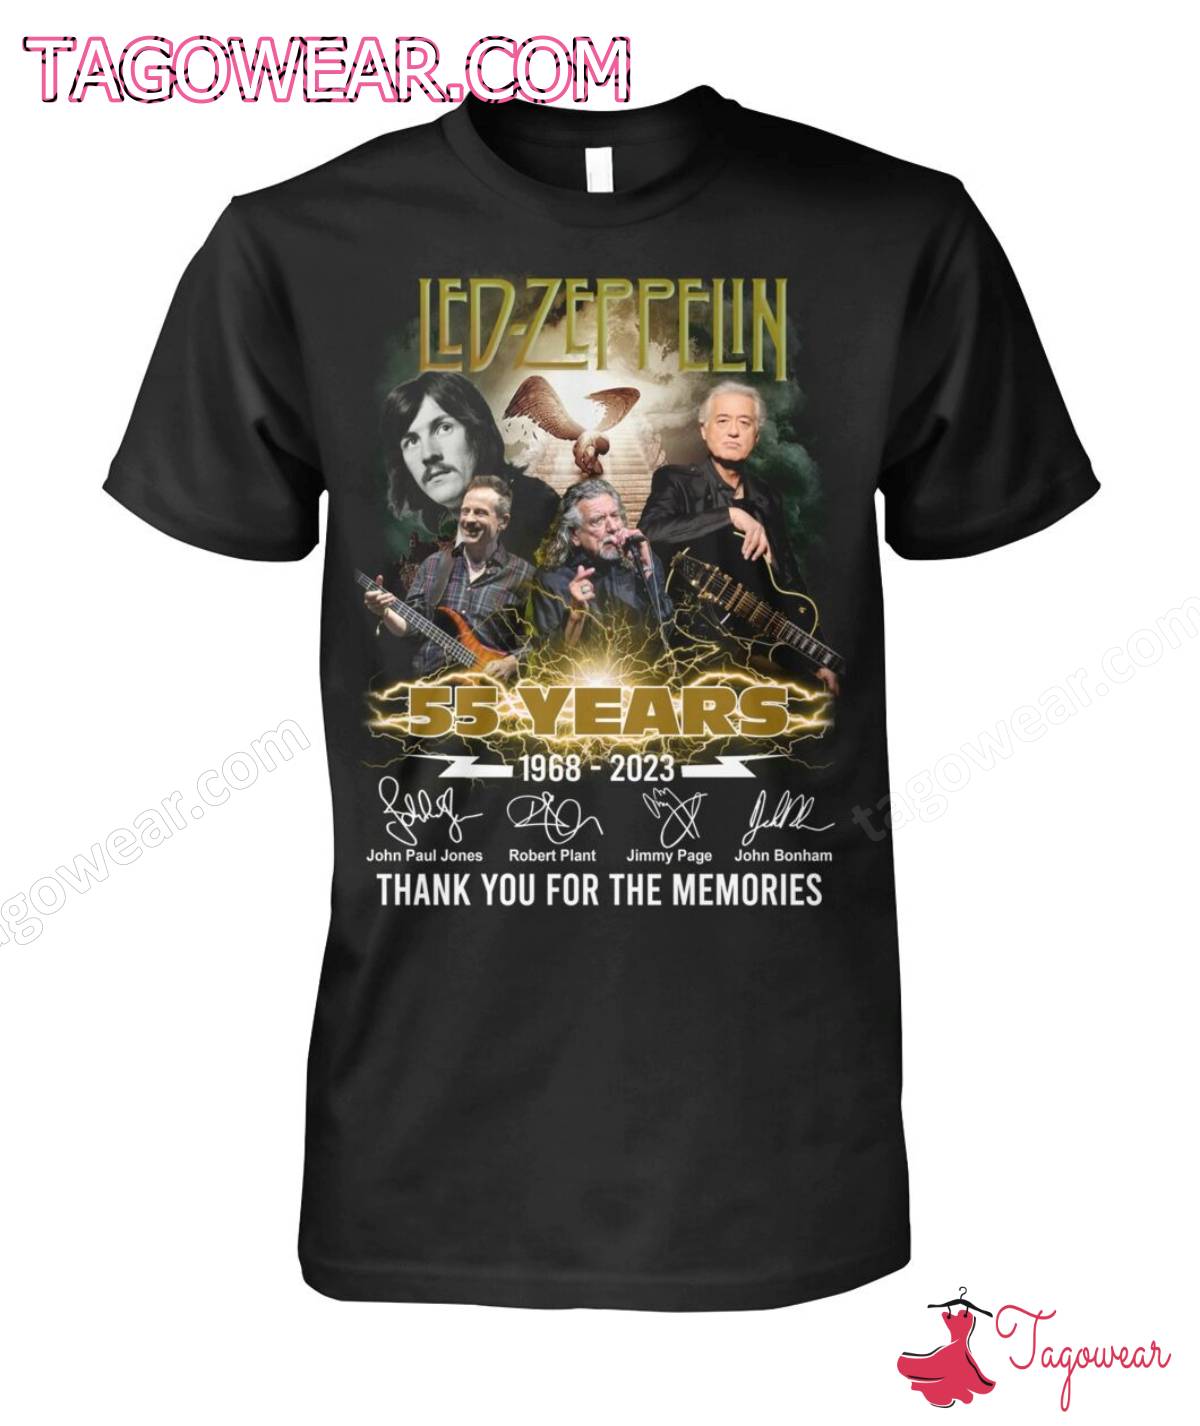 Led-zeppelin 55 Years 1968-2023 Signatures Thank You For The Memories Shirt, Tank Top